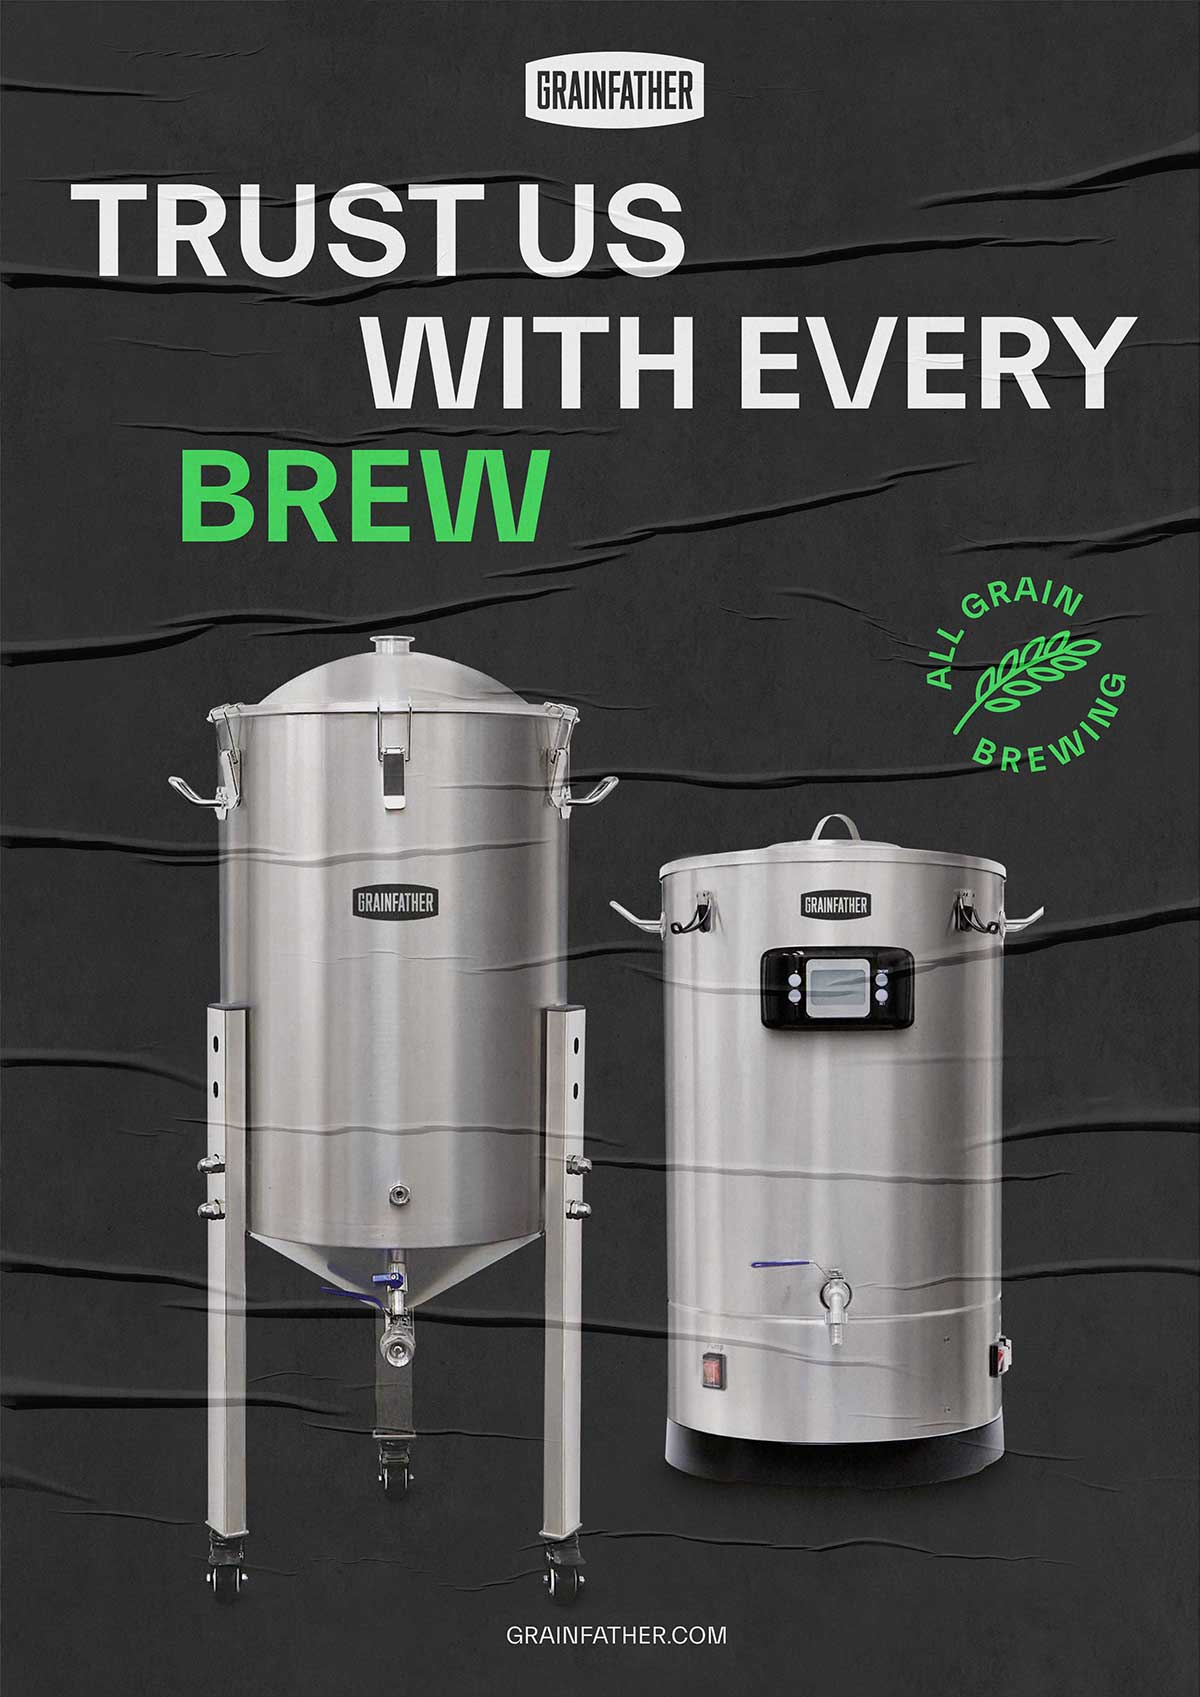 grainfather poster saying trust us with every brew